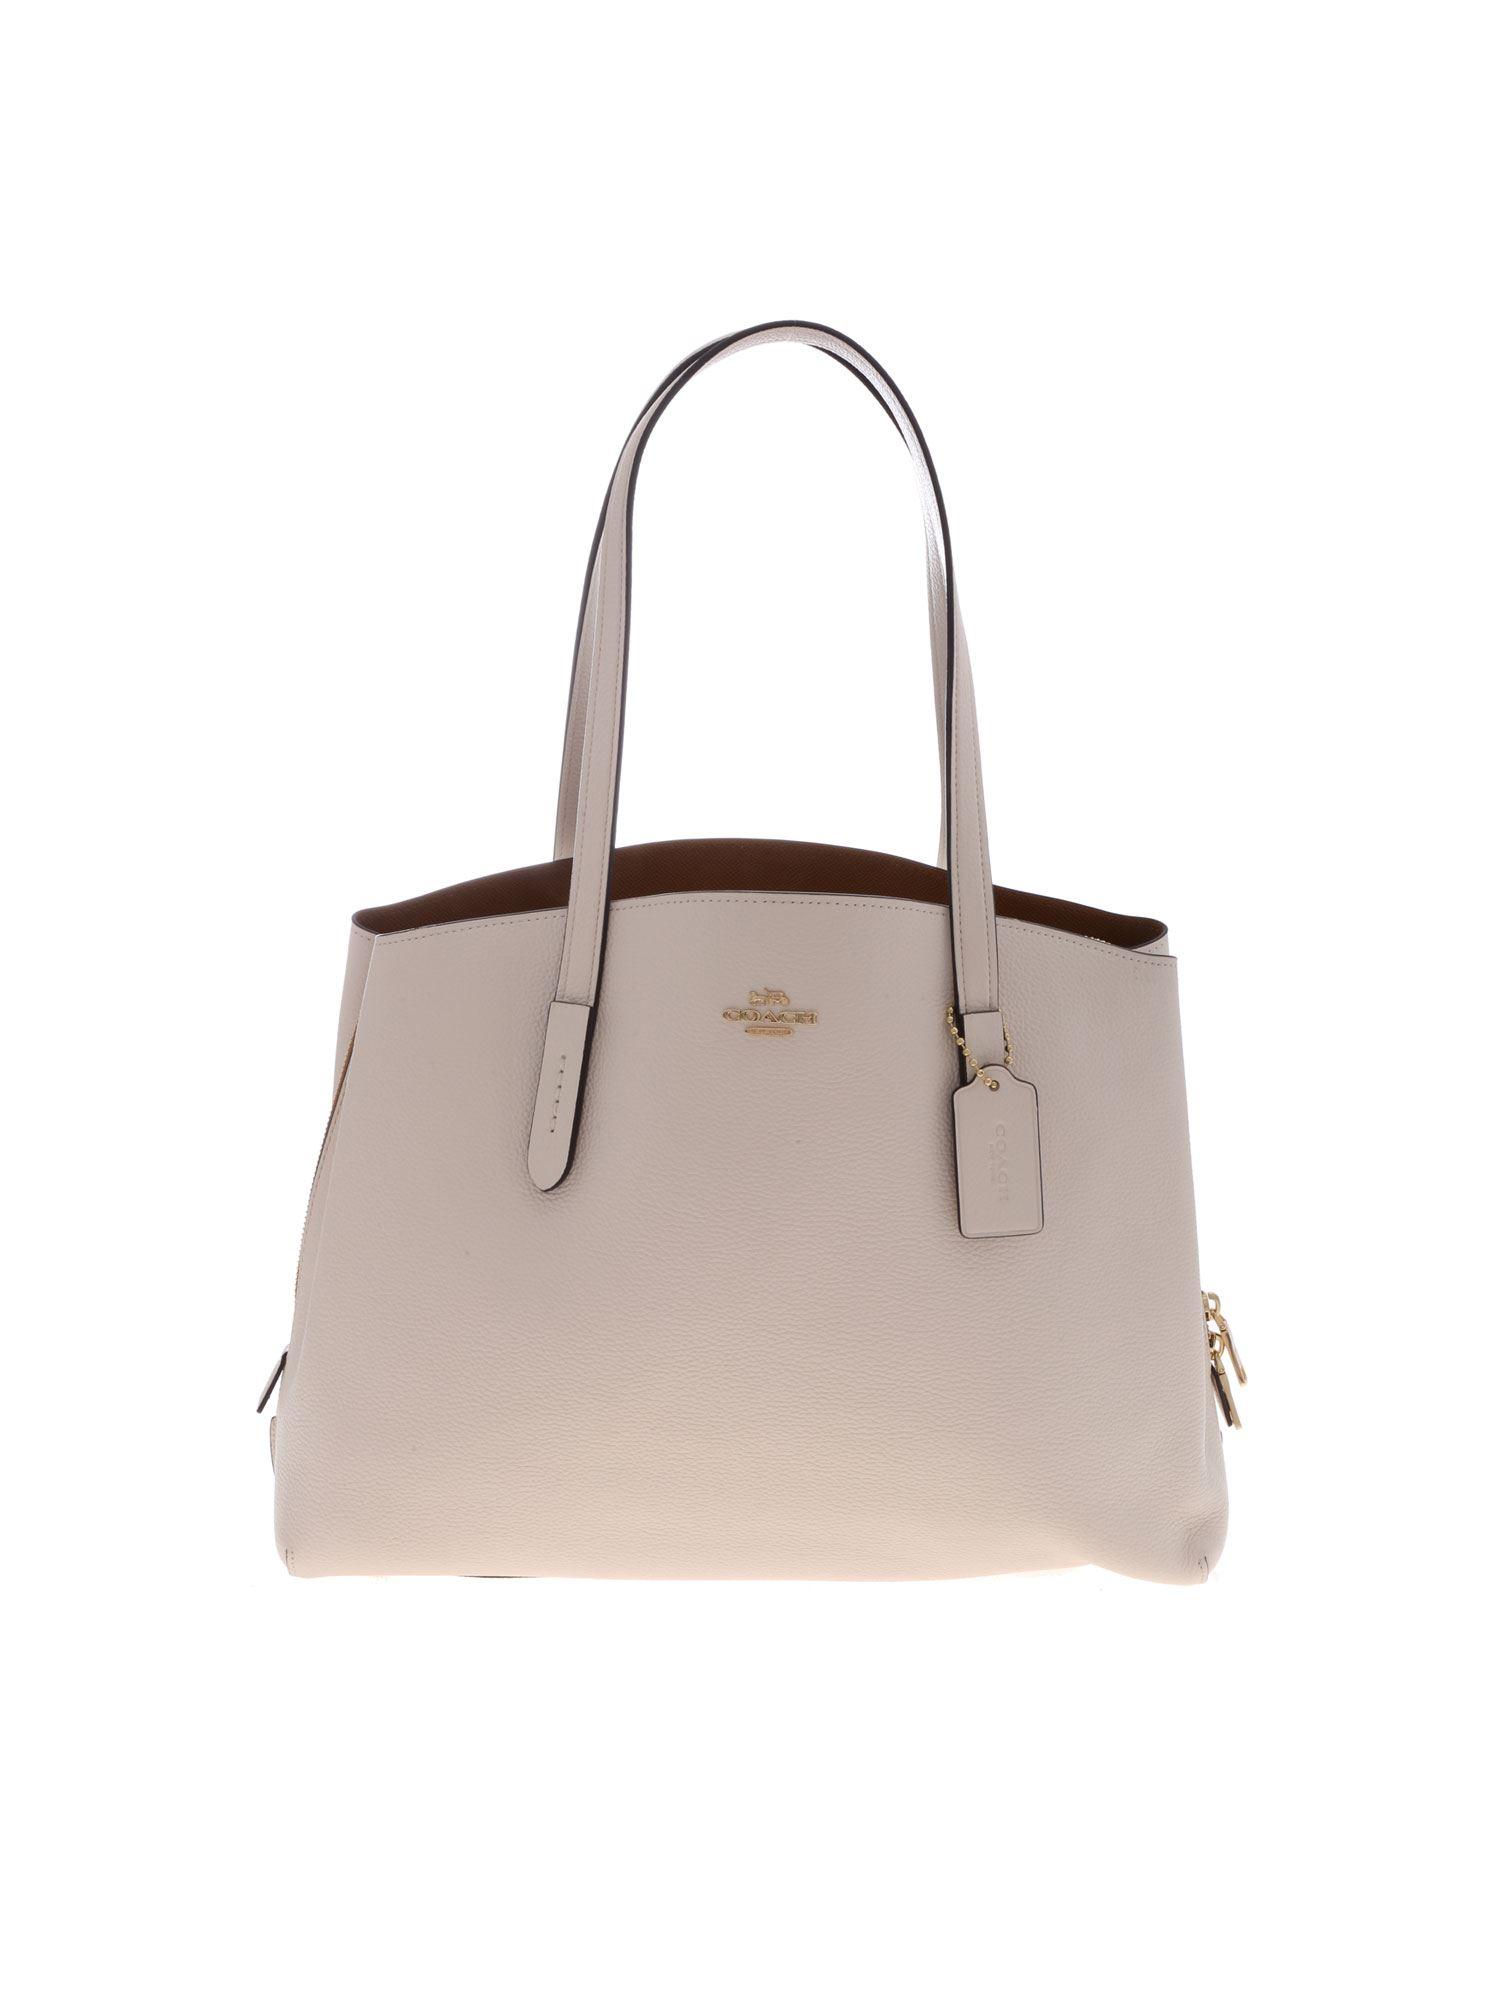 COACH Shoulder Bag In Cream Color Hammered Leather in Natural - Lyst